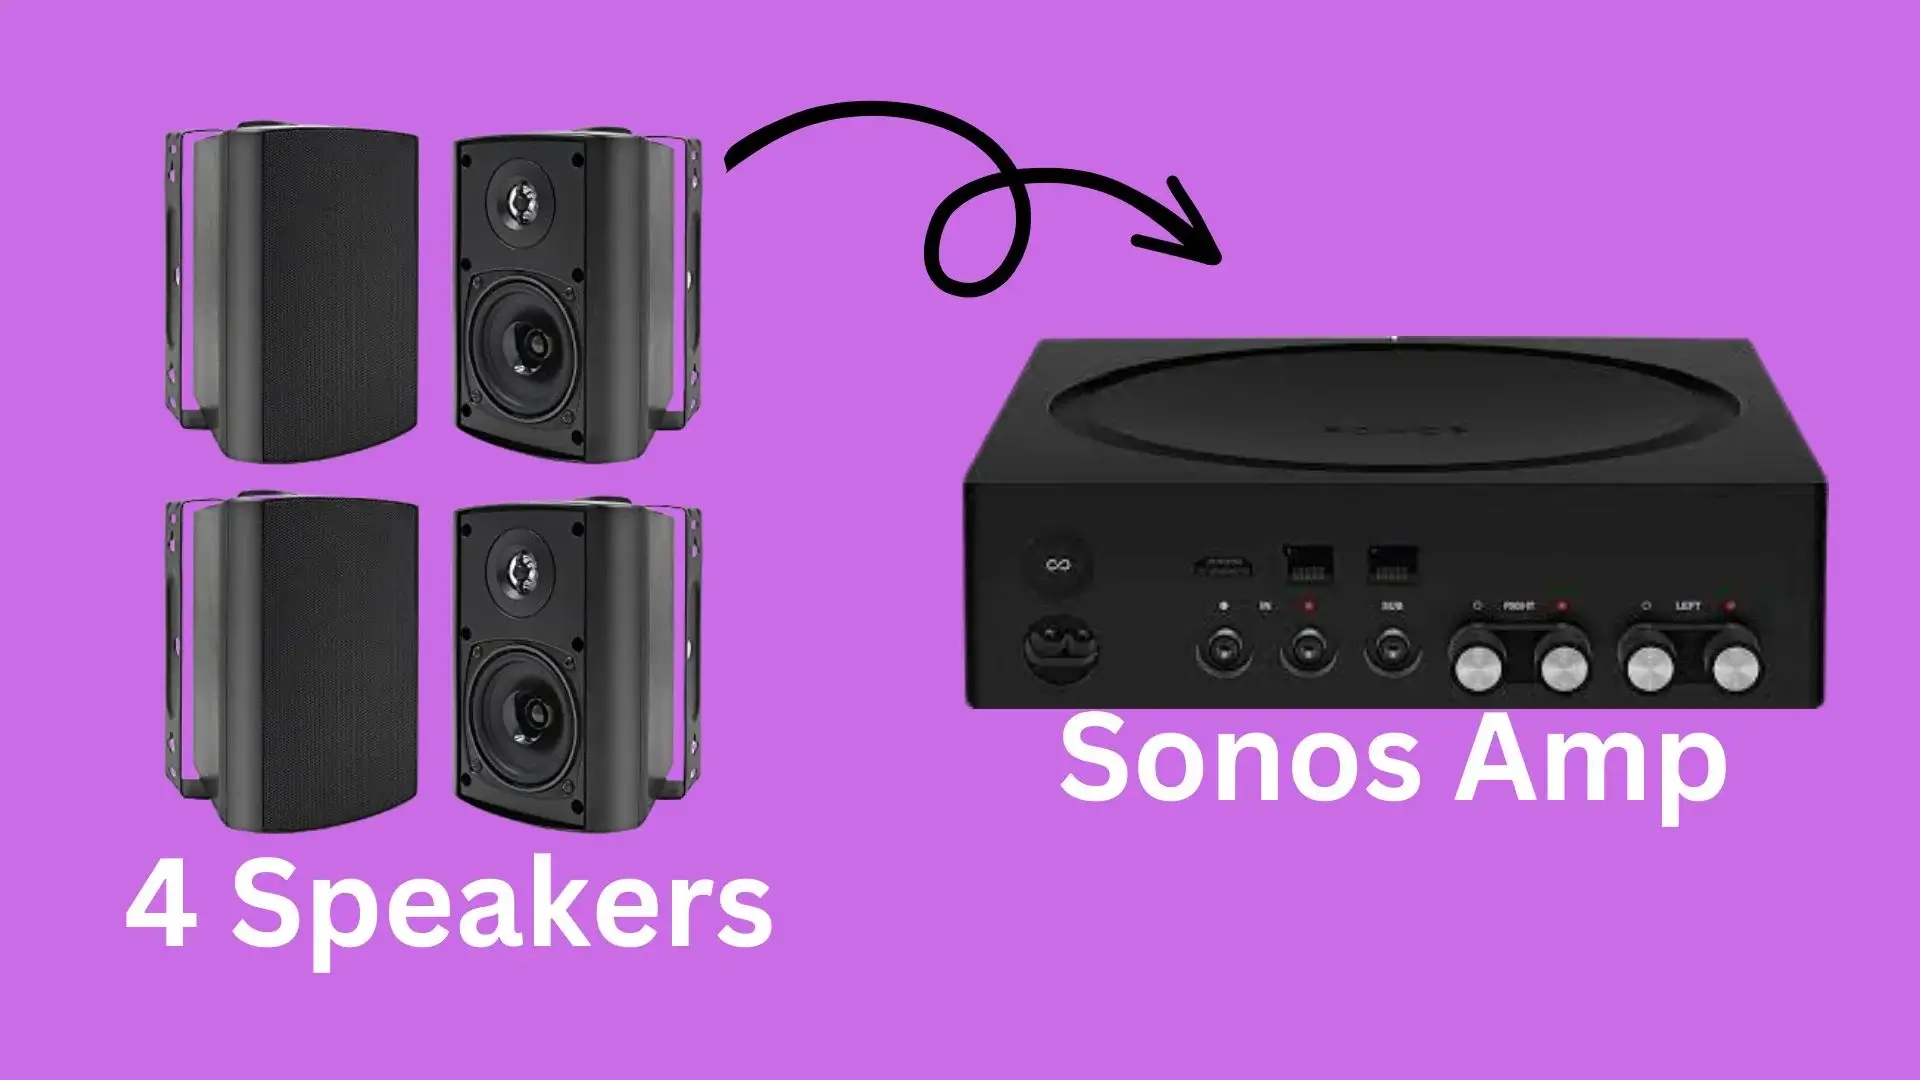 How To Connect 4 Speakers To Sonos Amplifier